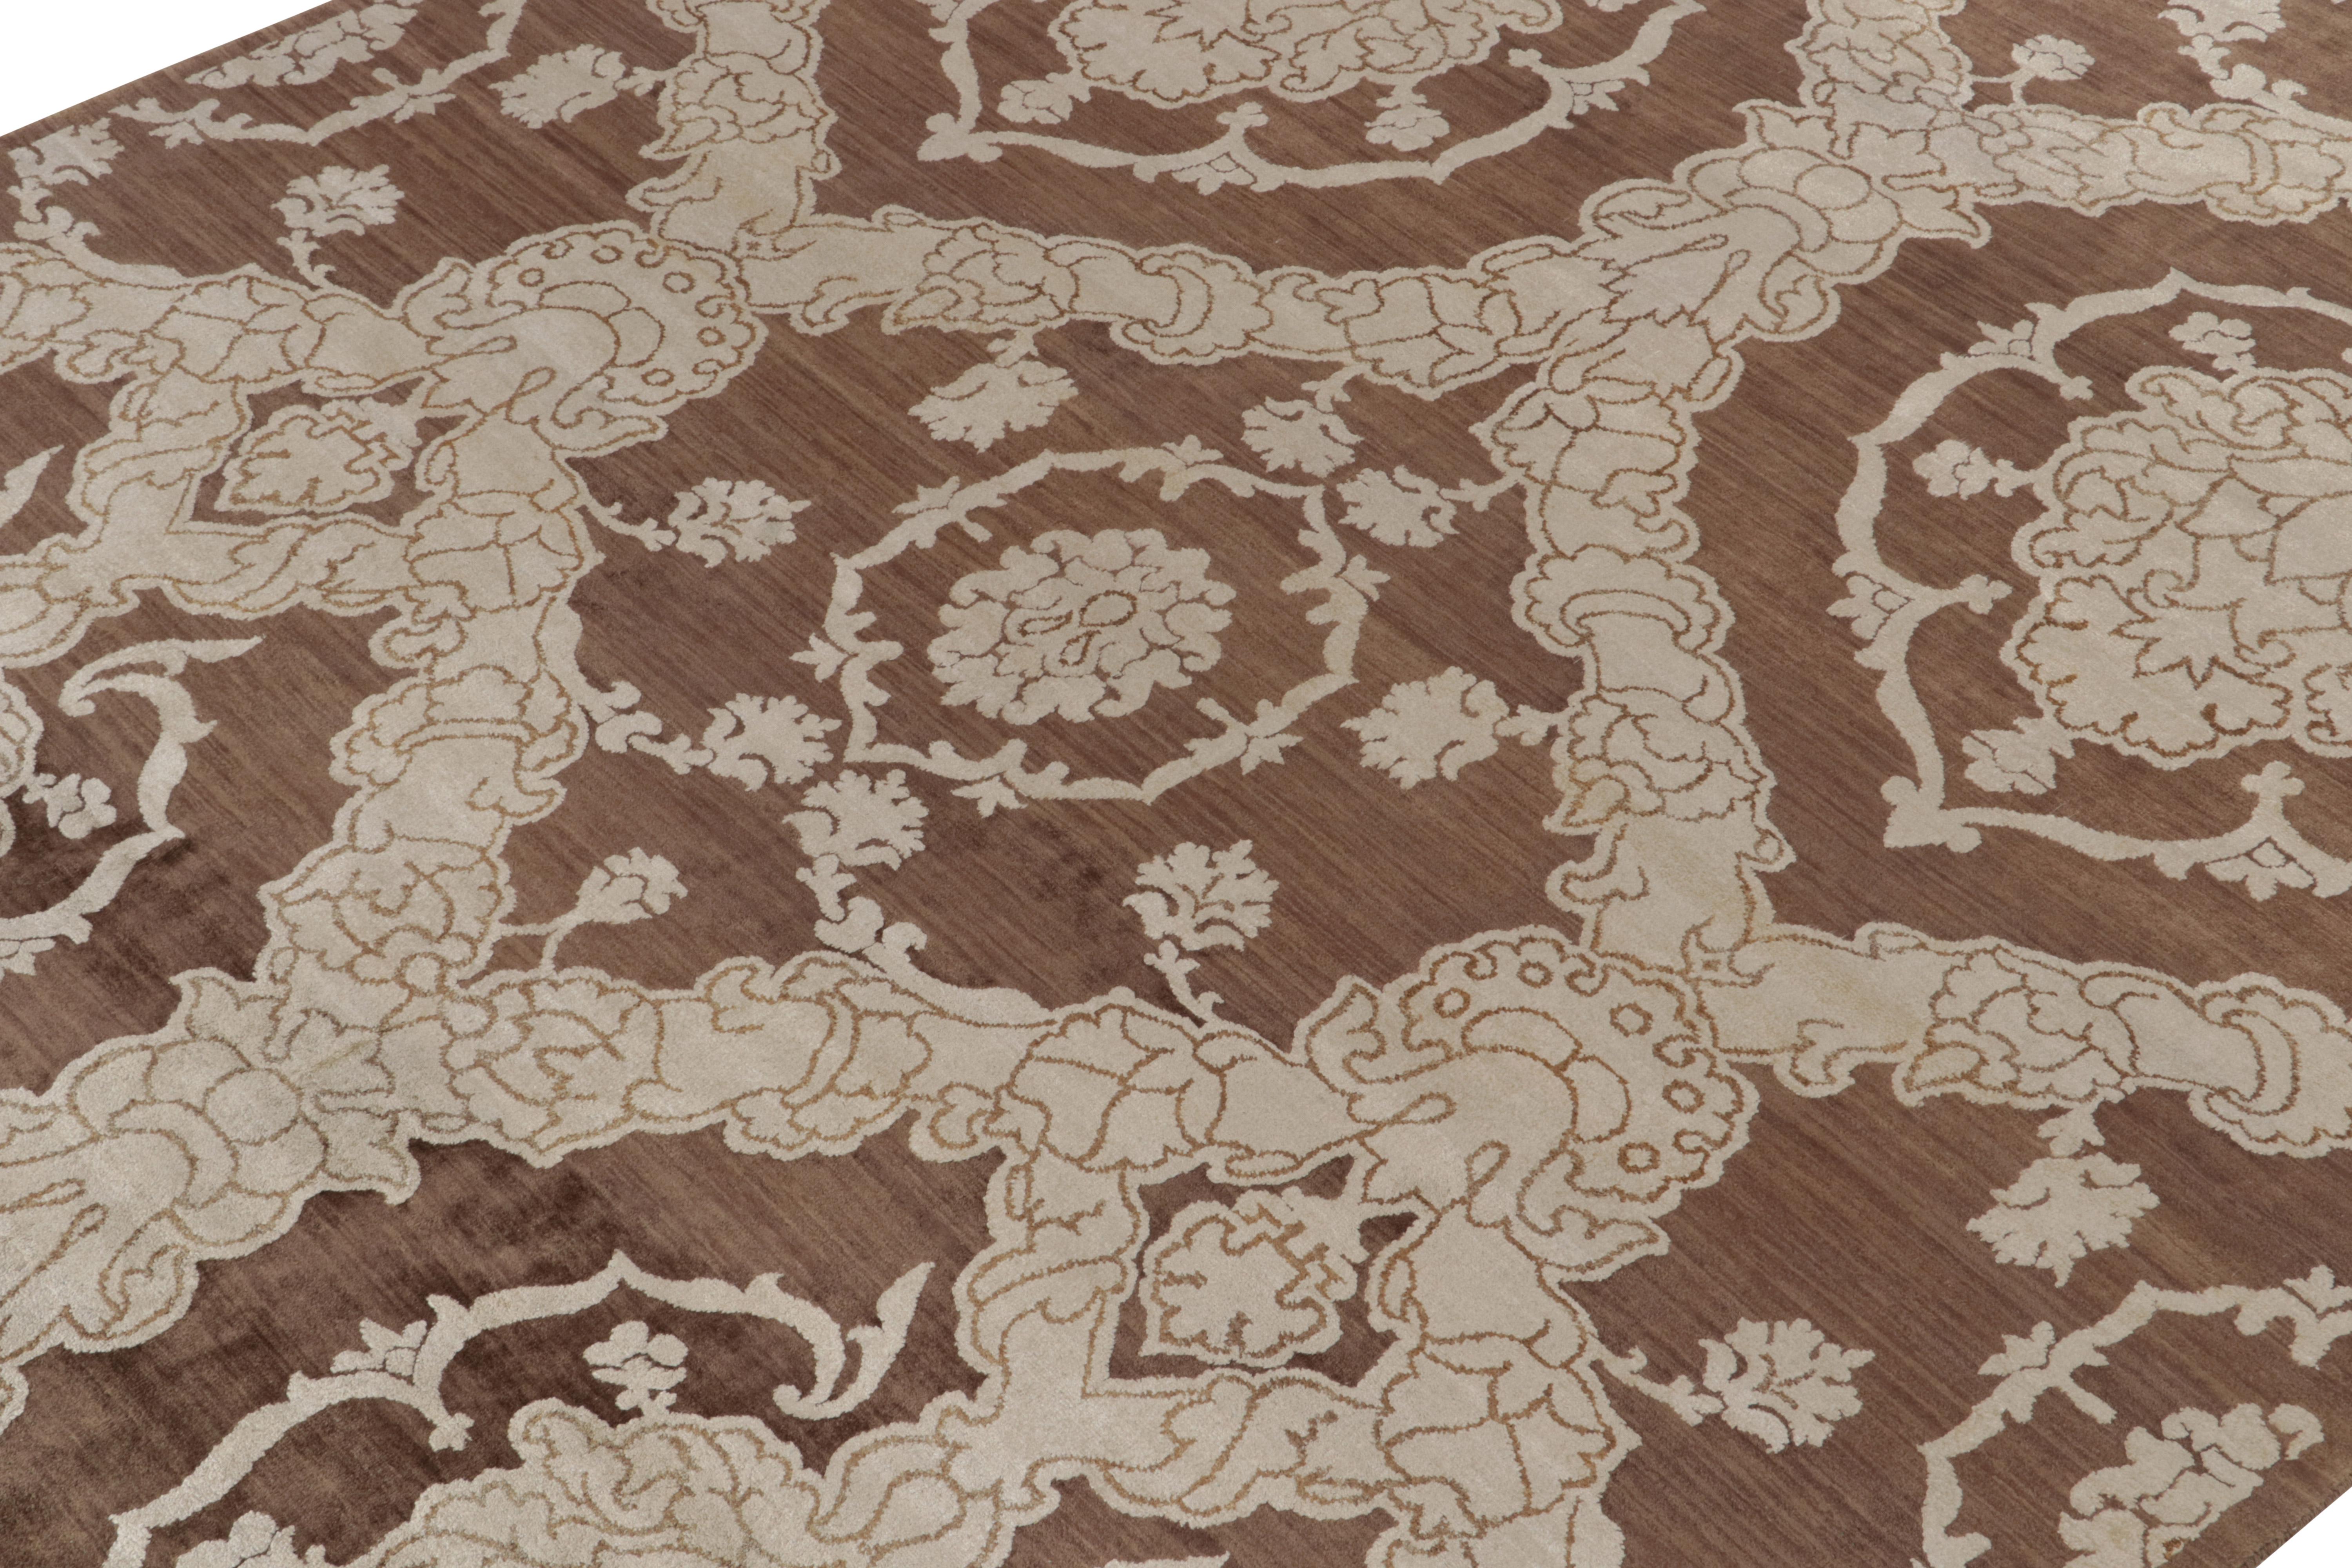 Hand-Knotted Rug & Kilim’s Italian Style Rug in Brown with Off-White Floral Patterns For Sale